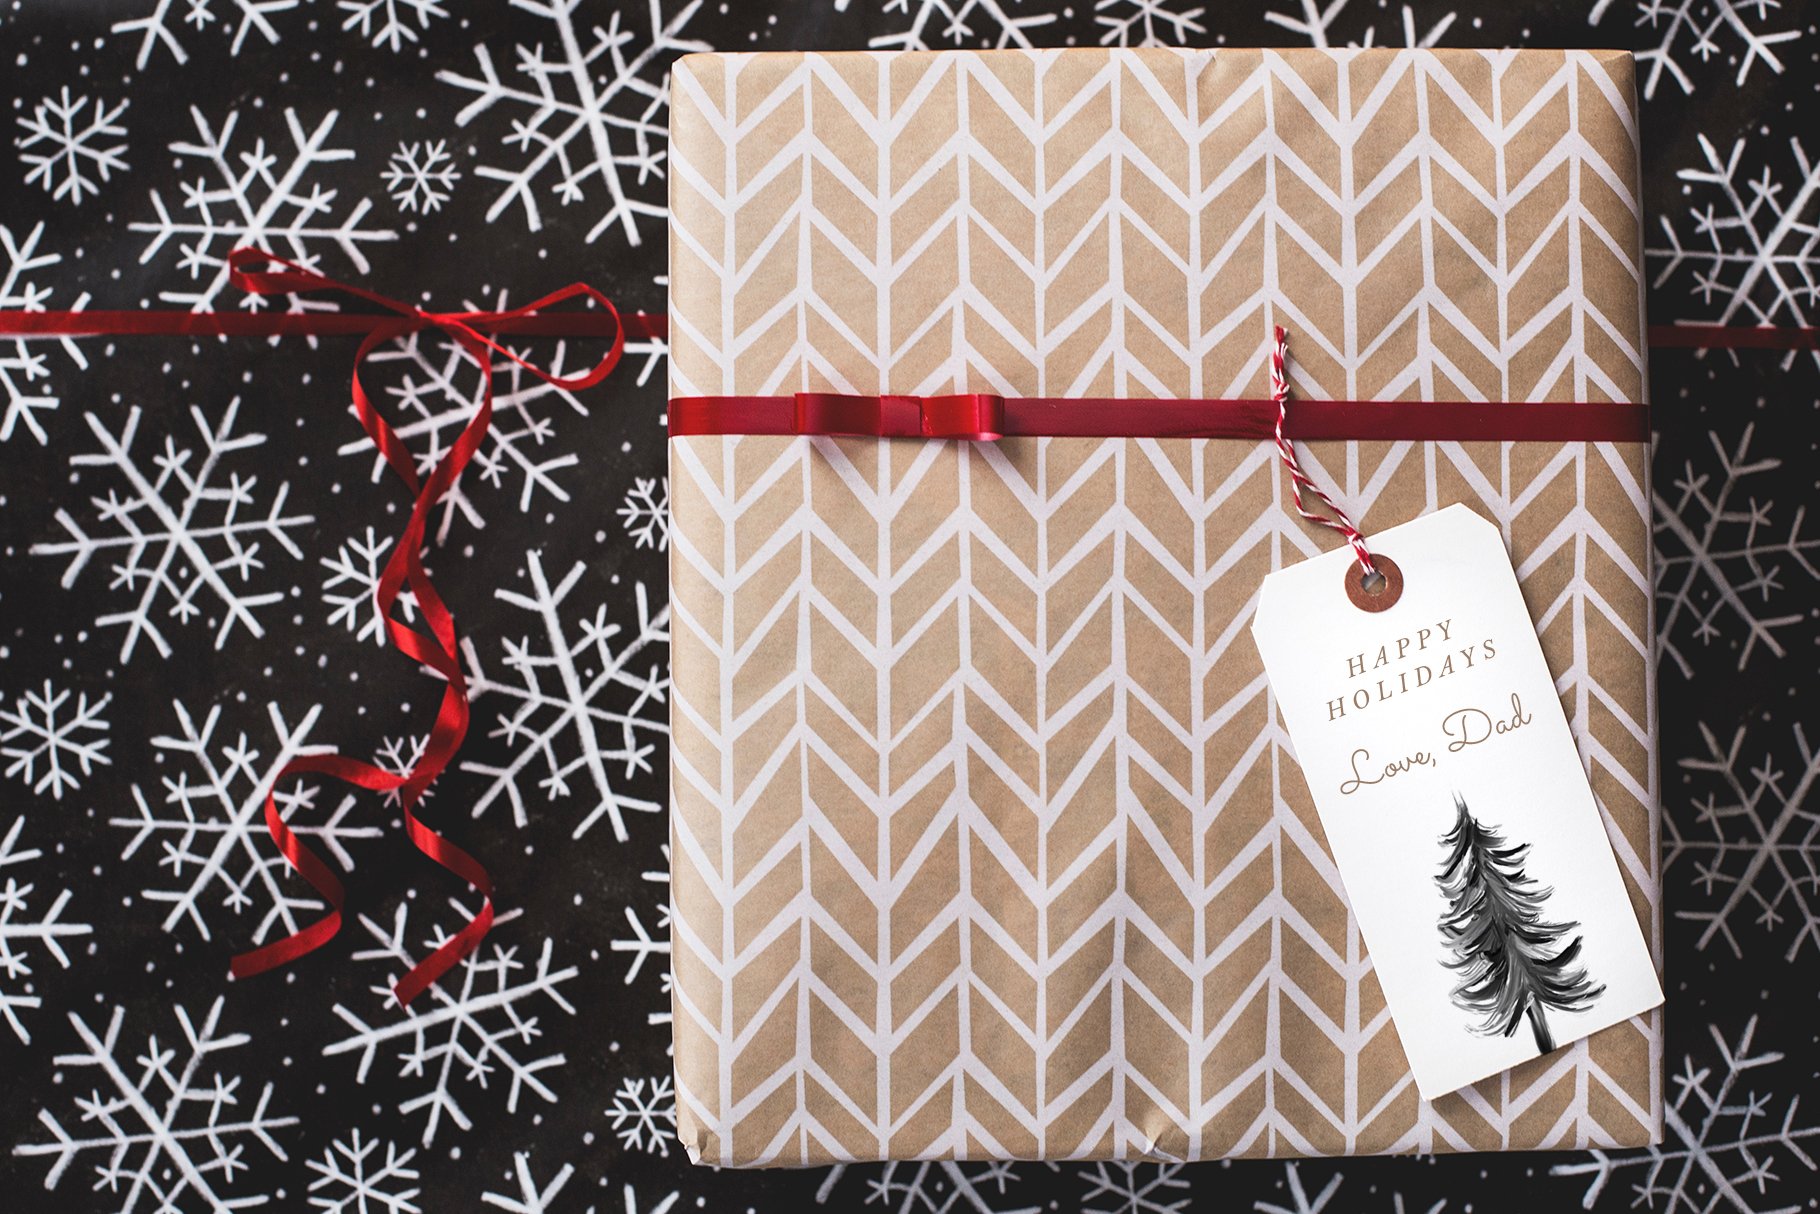 Gift wrapped in brown paper with a red ribbon.